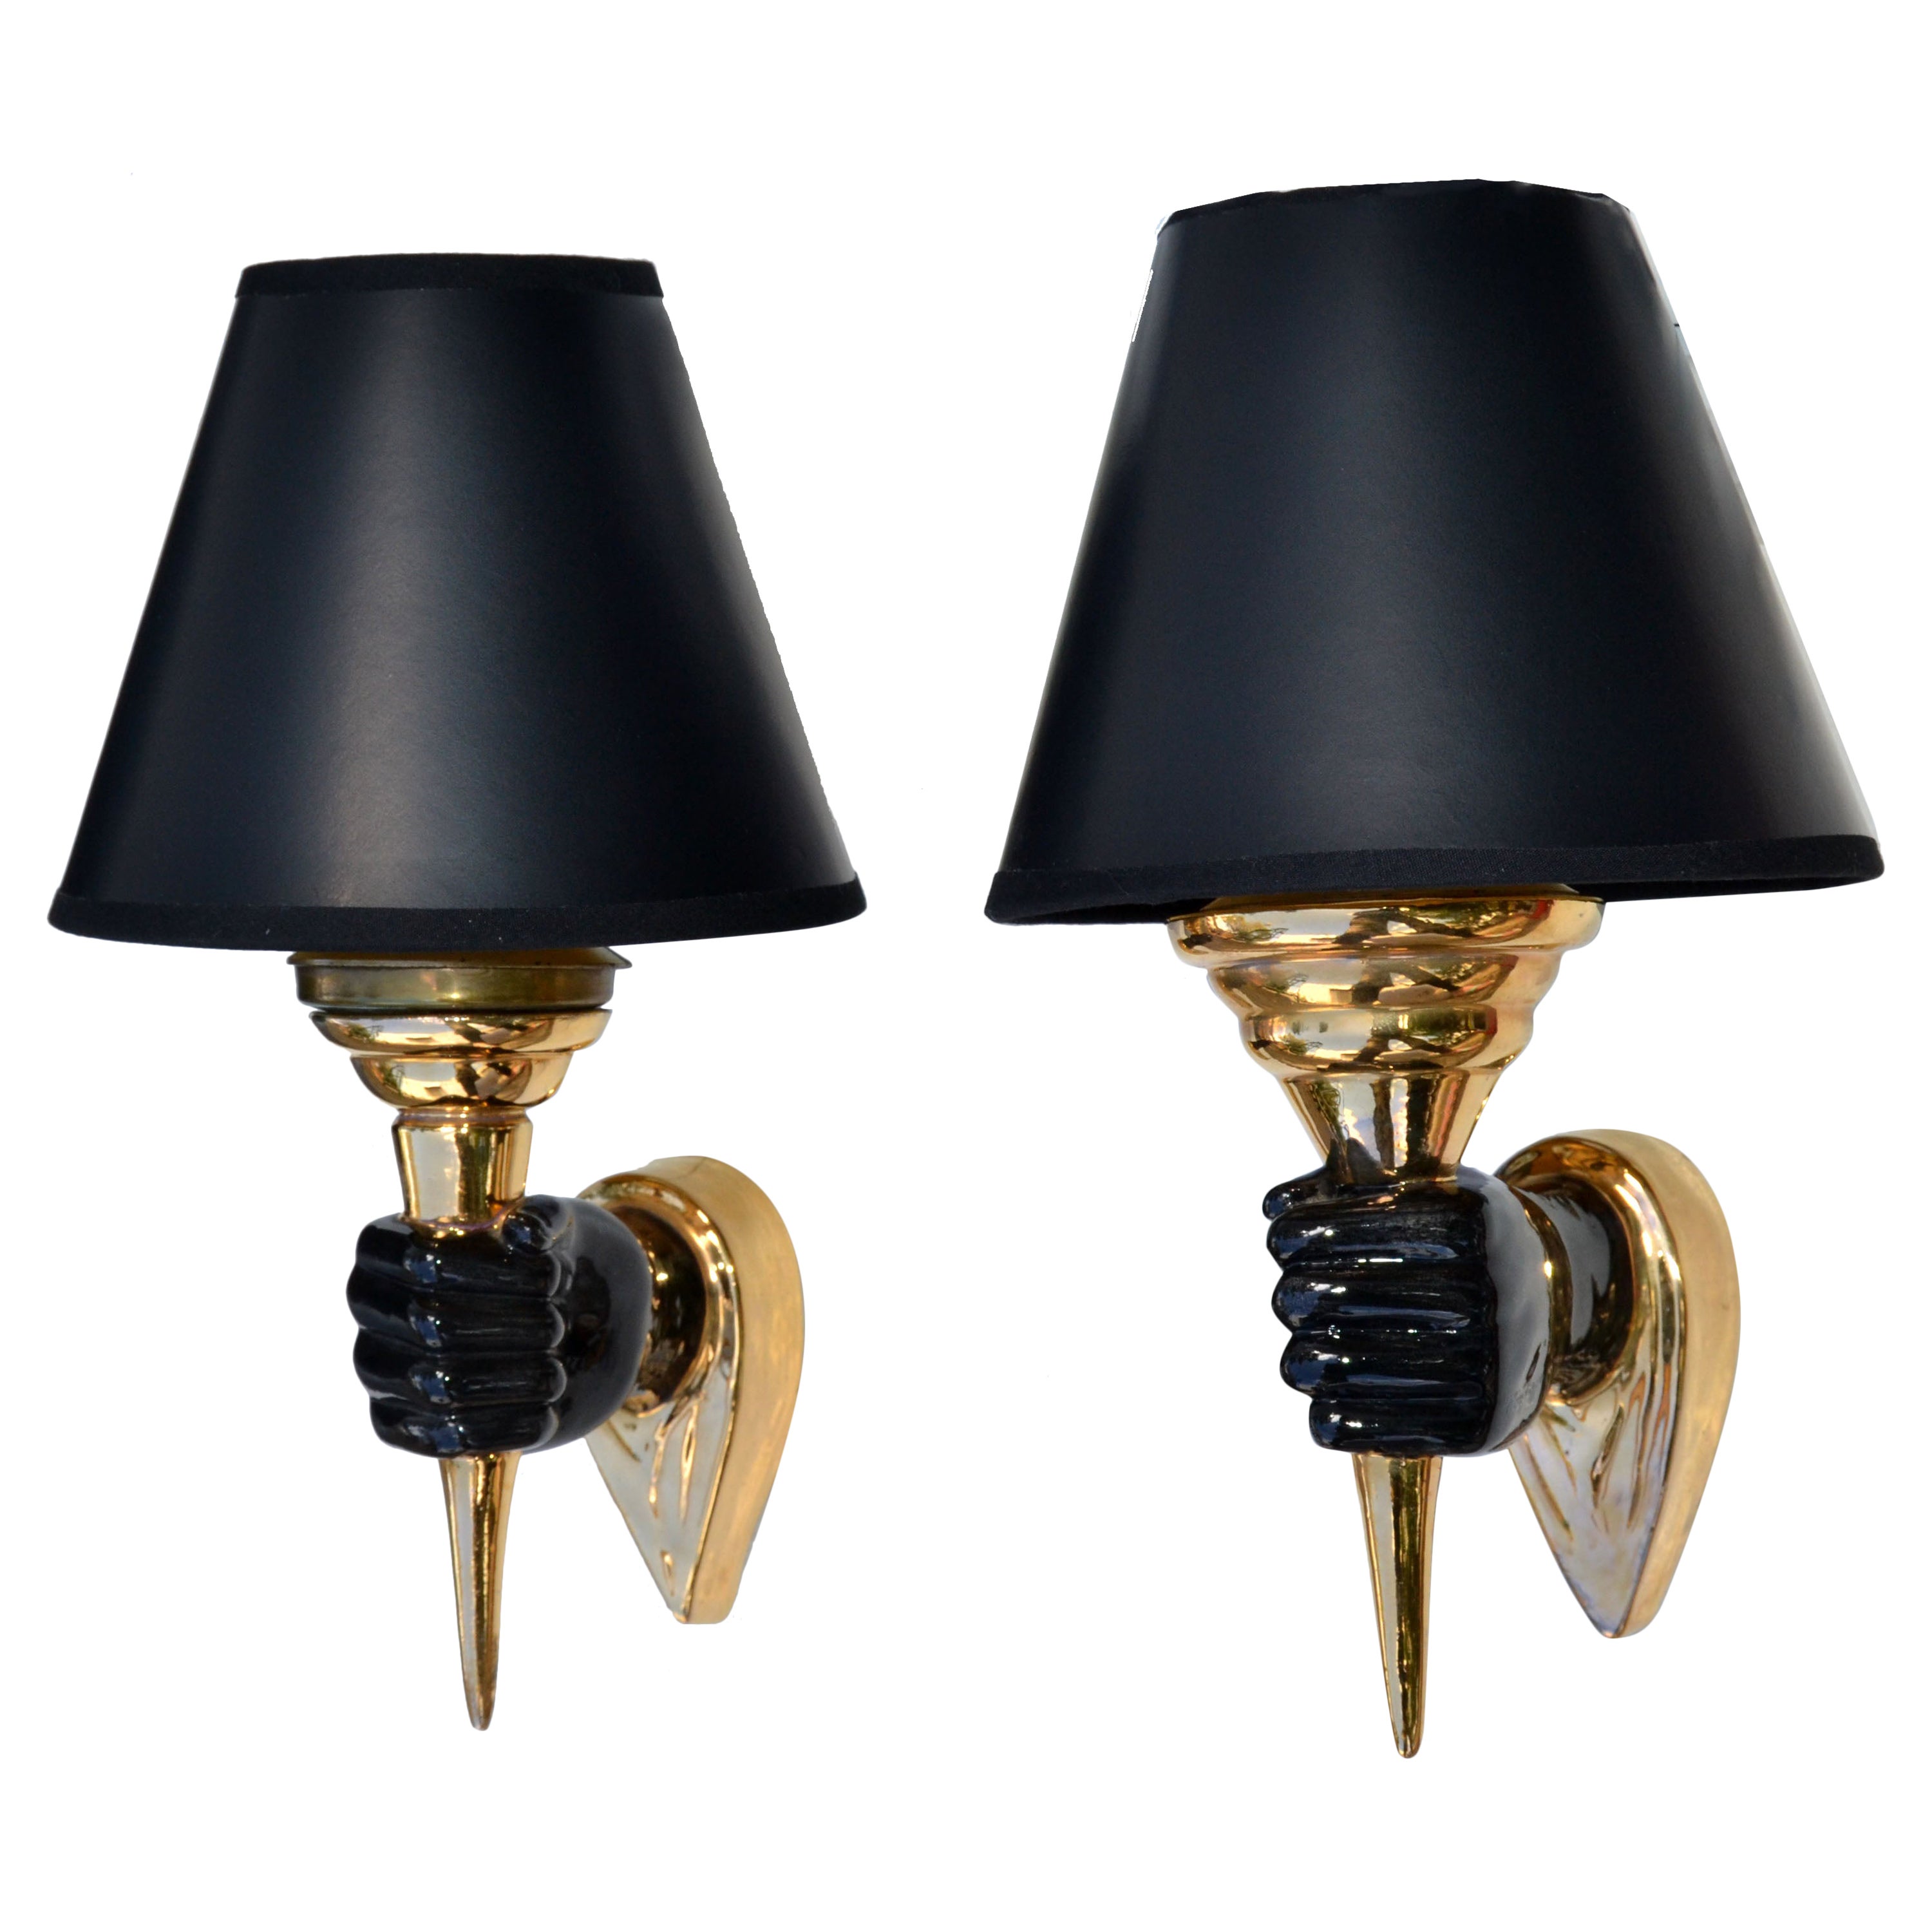 Pair of Ceramic Black & Gold French Hand Sconces Wall Lights Mid-Century Modern